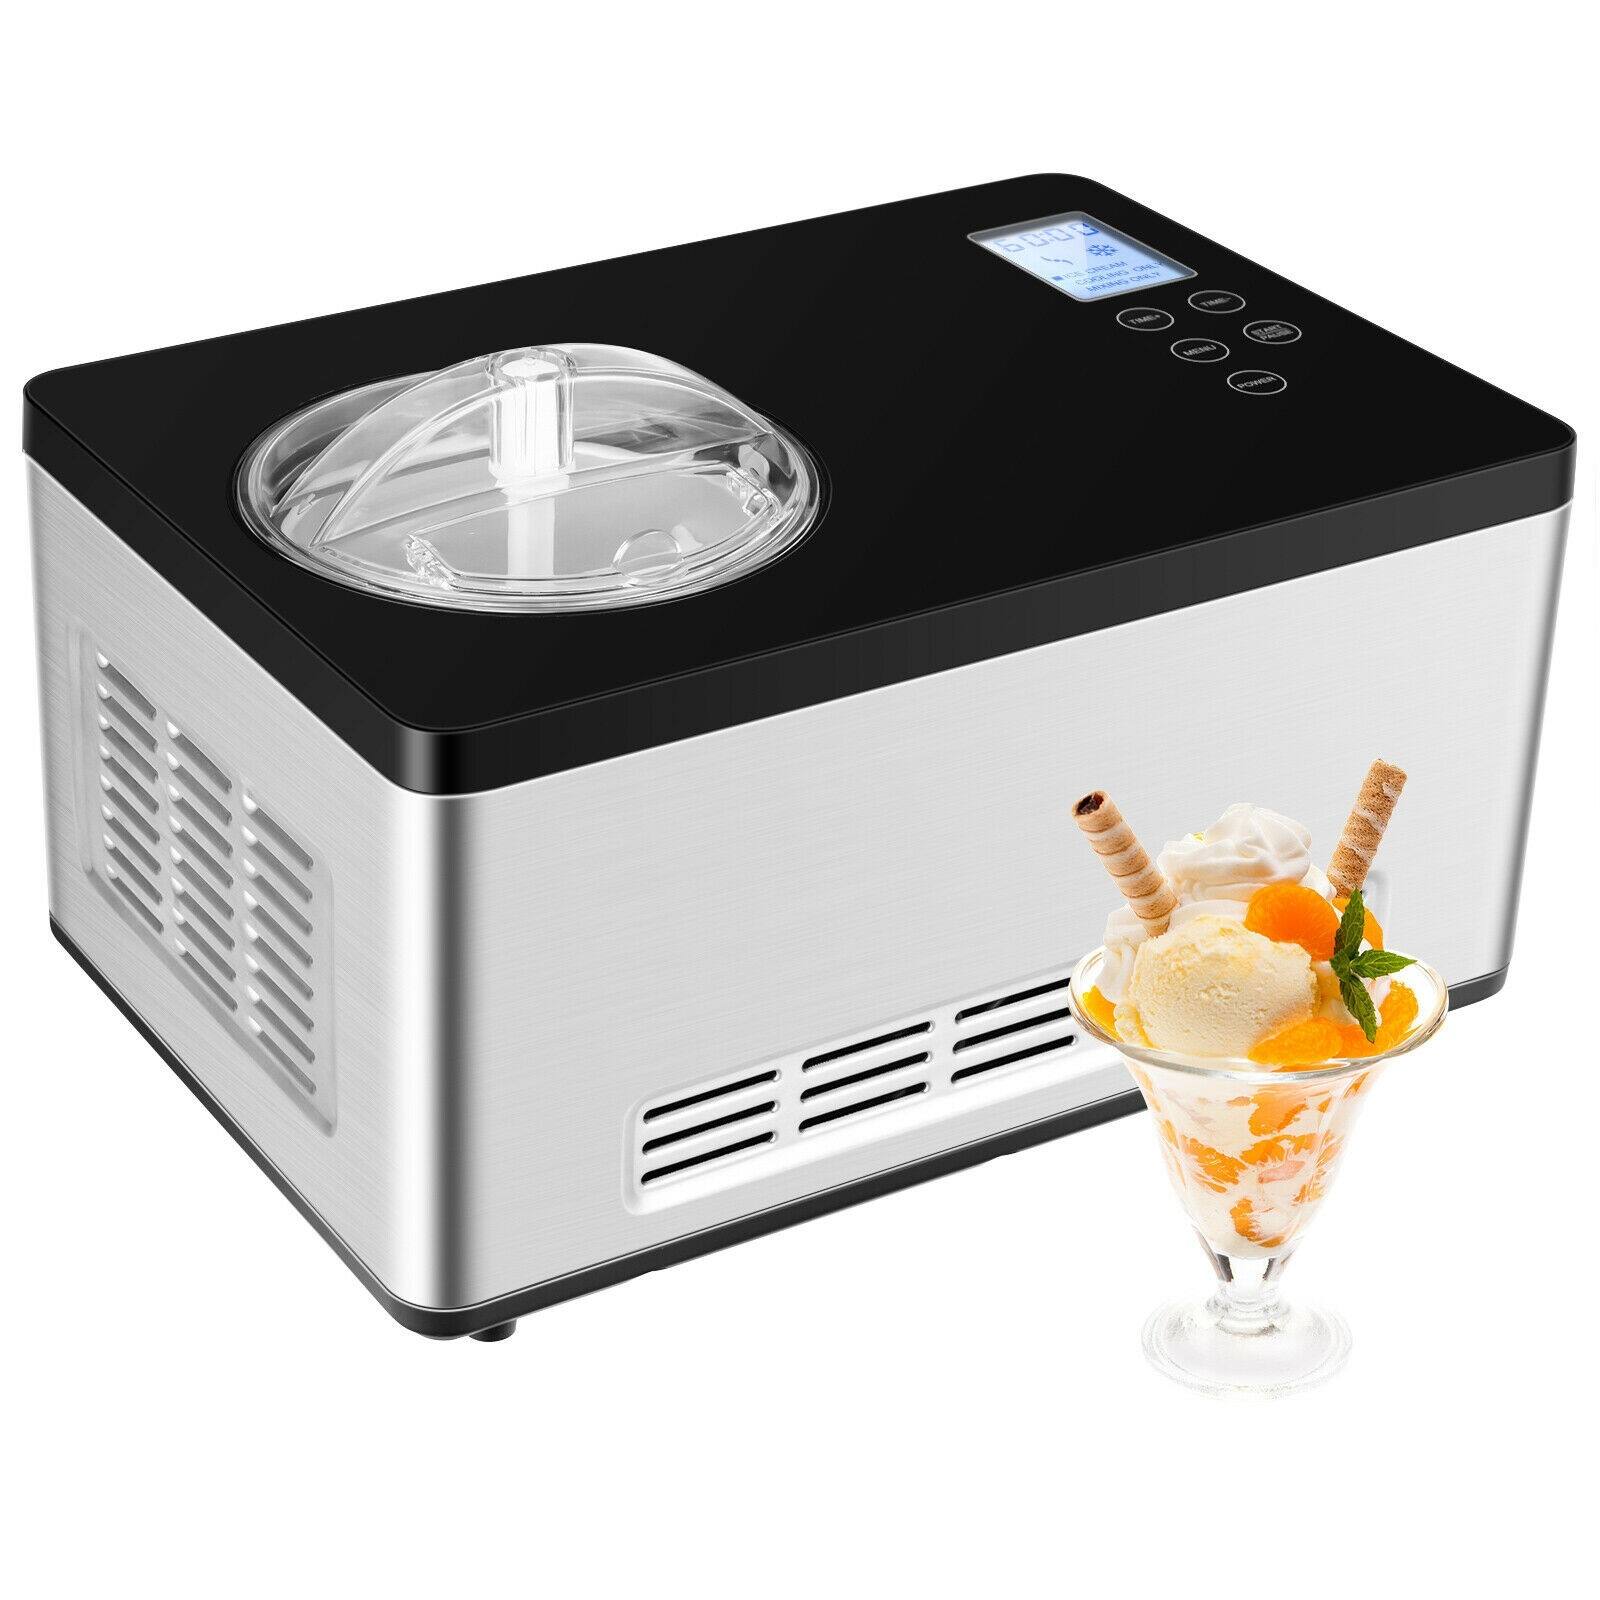 Costway 2.1 Quart Ice Cream Maker with LCD Timer Control - $199.95 + Free Shipping